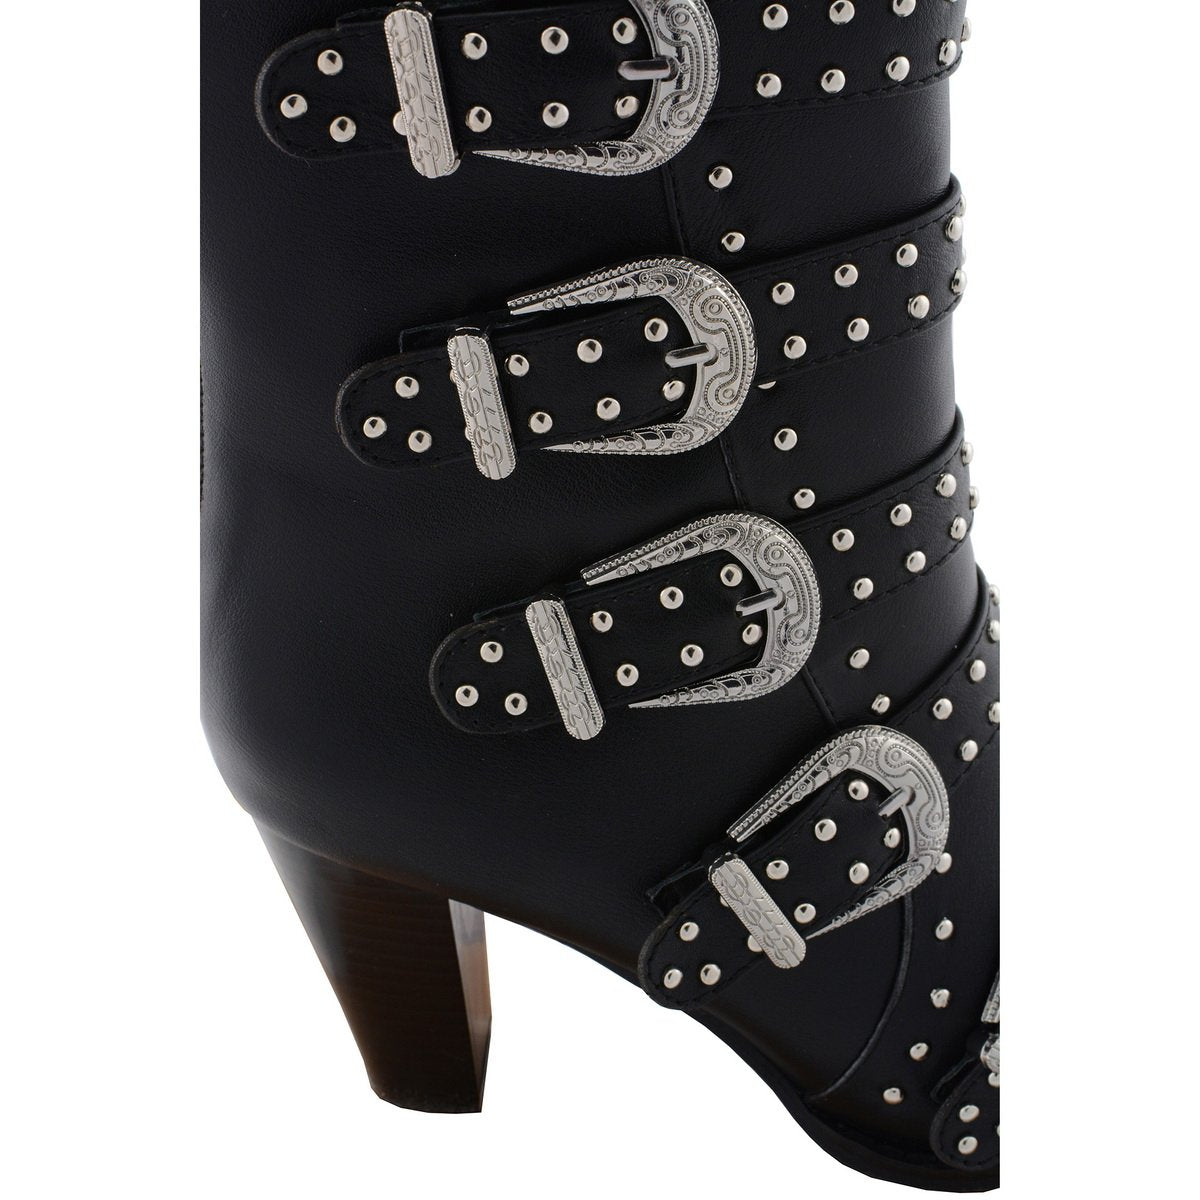 Milwaukee Performance MBL9428 Women's Black Buckle Up Boots with Studded Bling